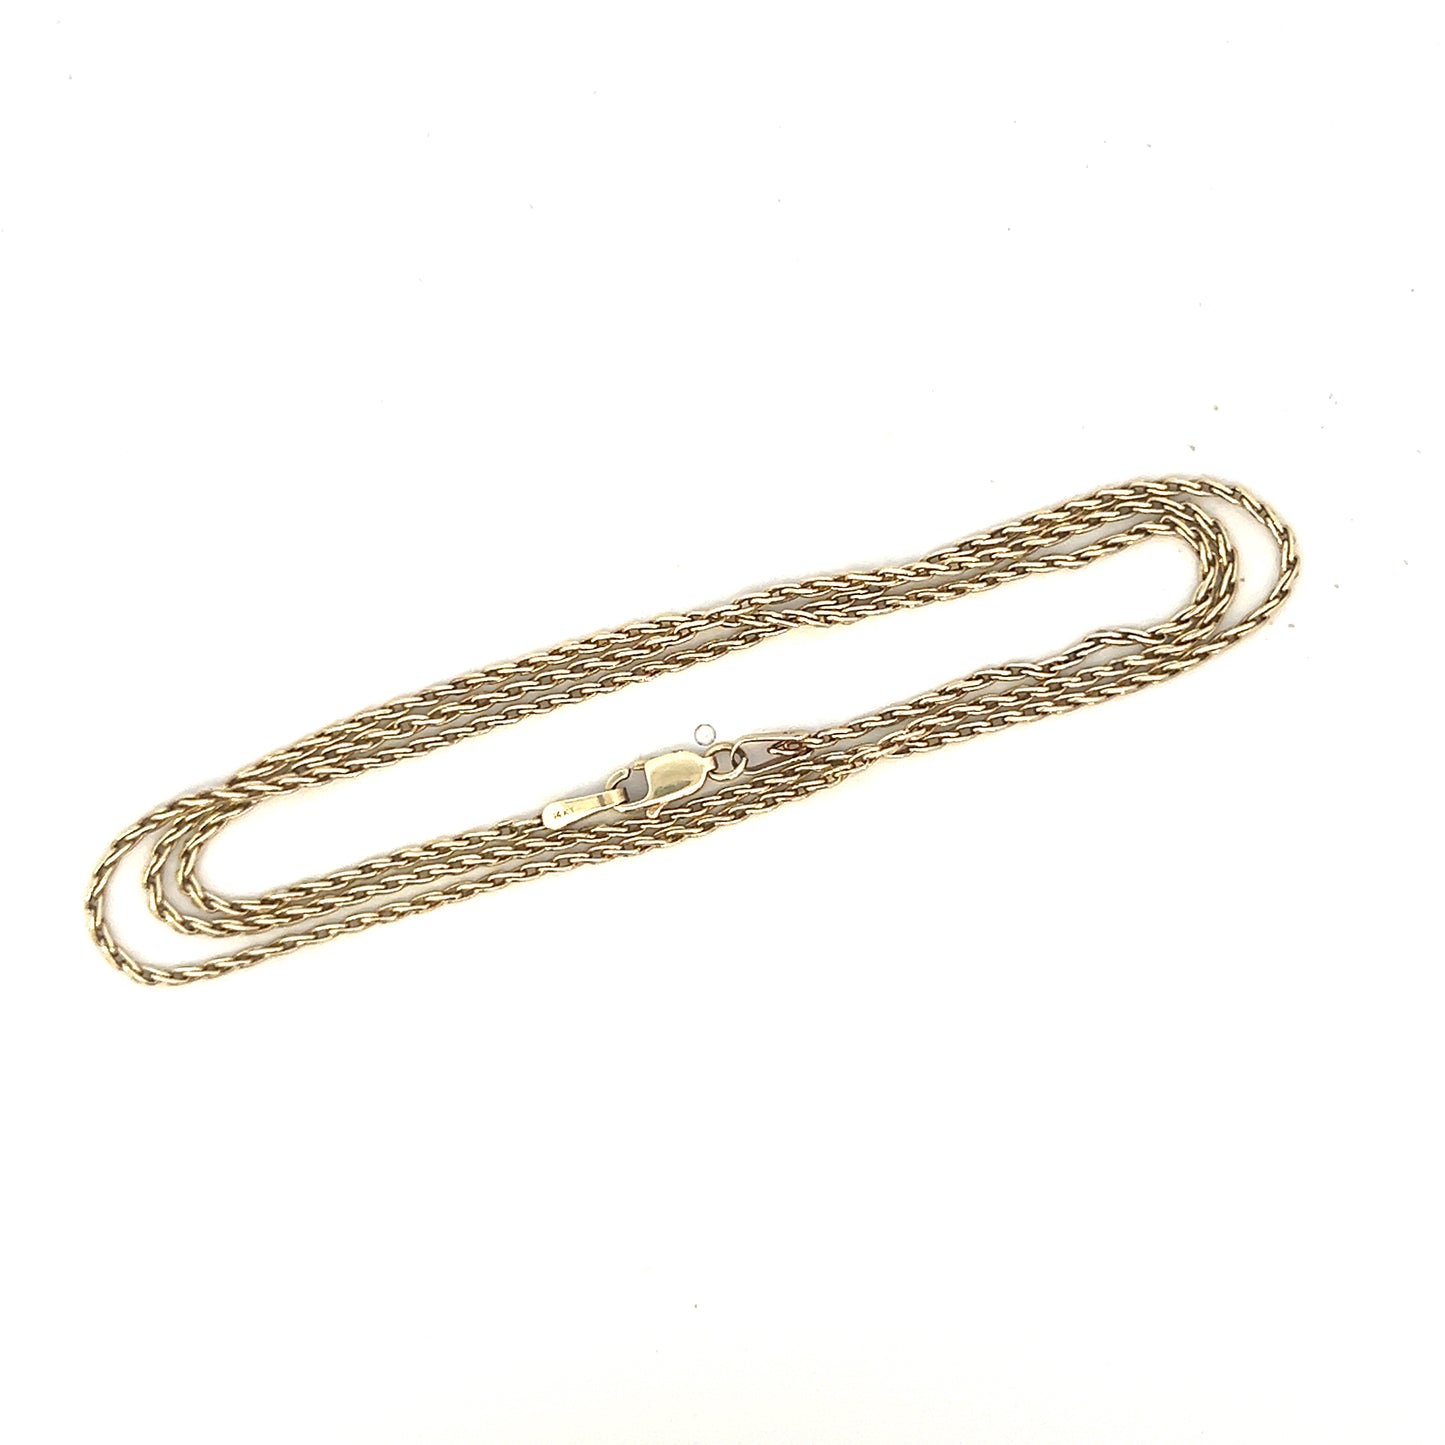 20" Rectangle Link Rope Chain - 14k - Yellow Gold - 4.73g